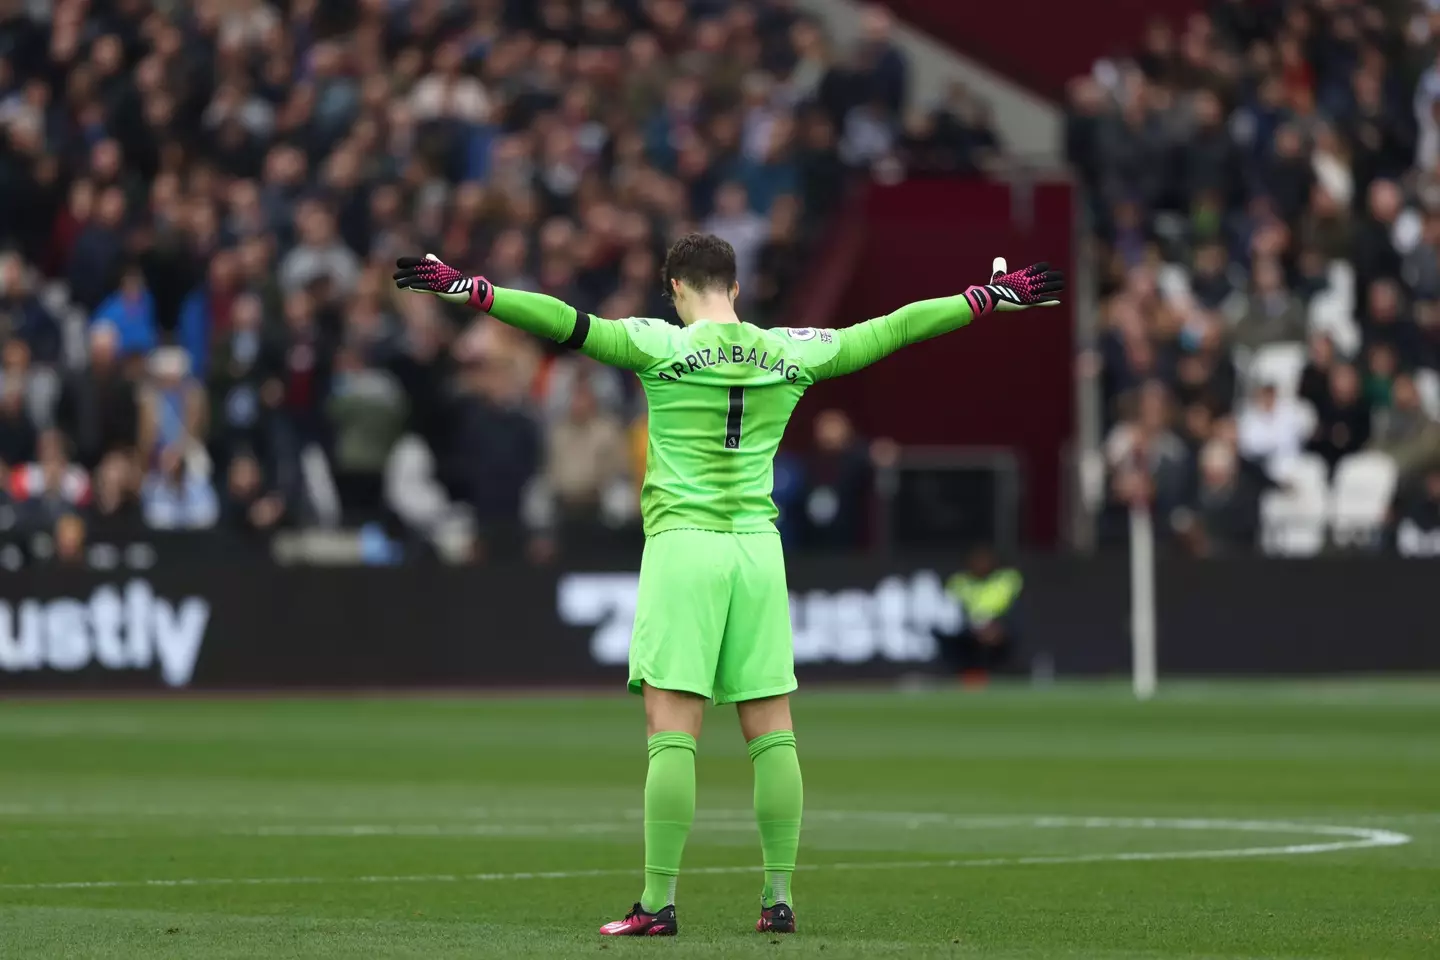 Kepa has been in fine form for Chelsea this season